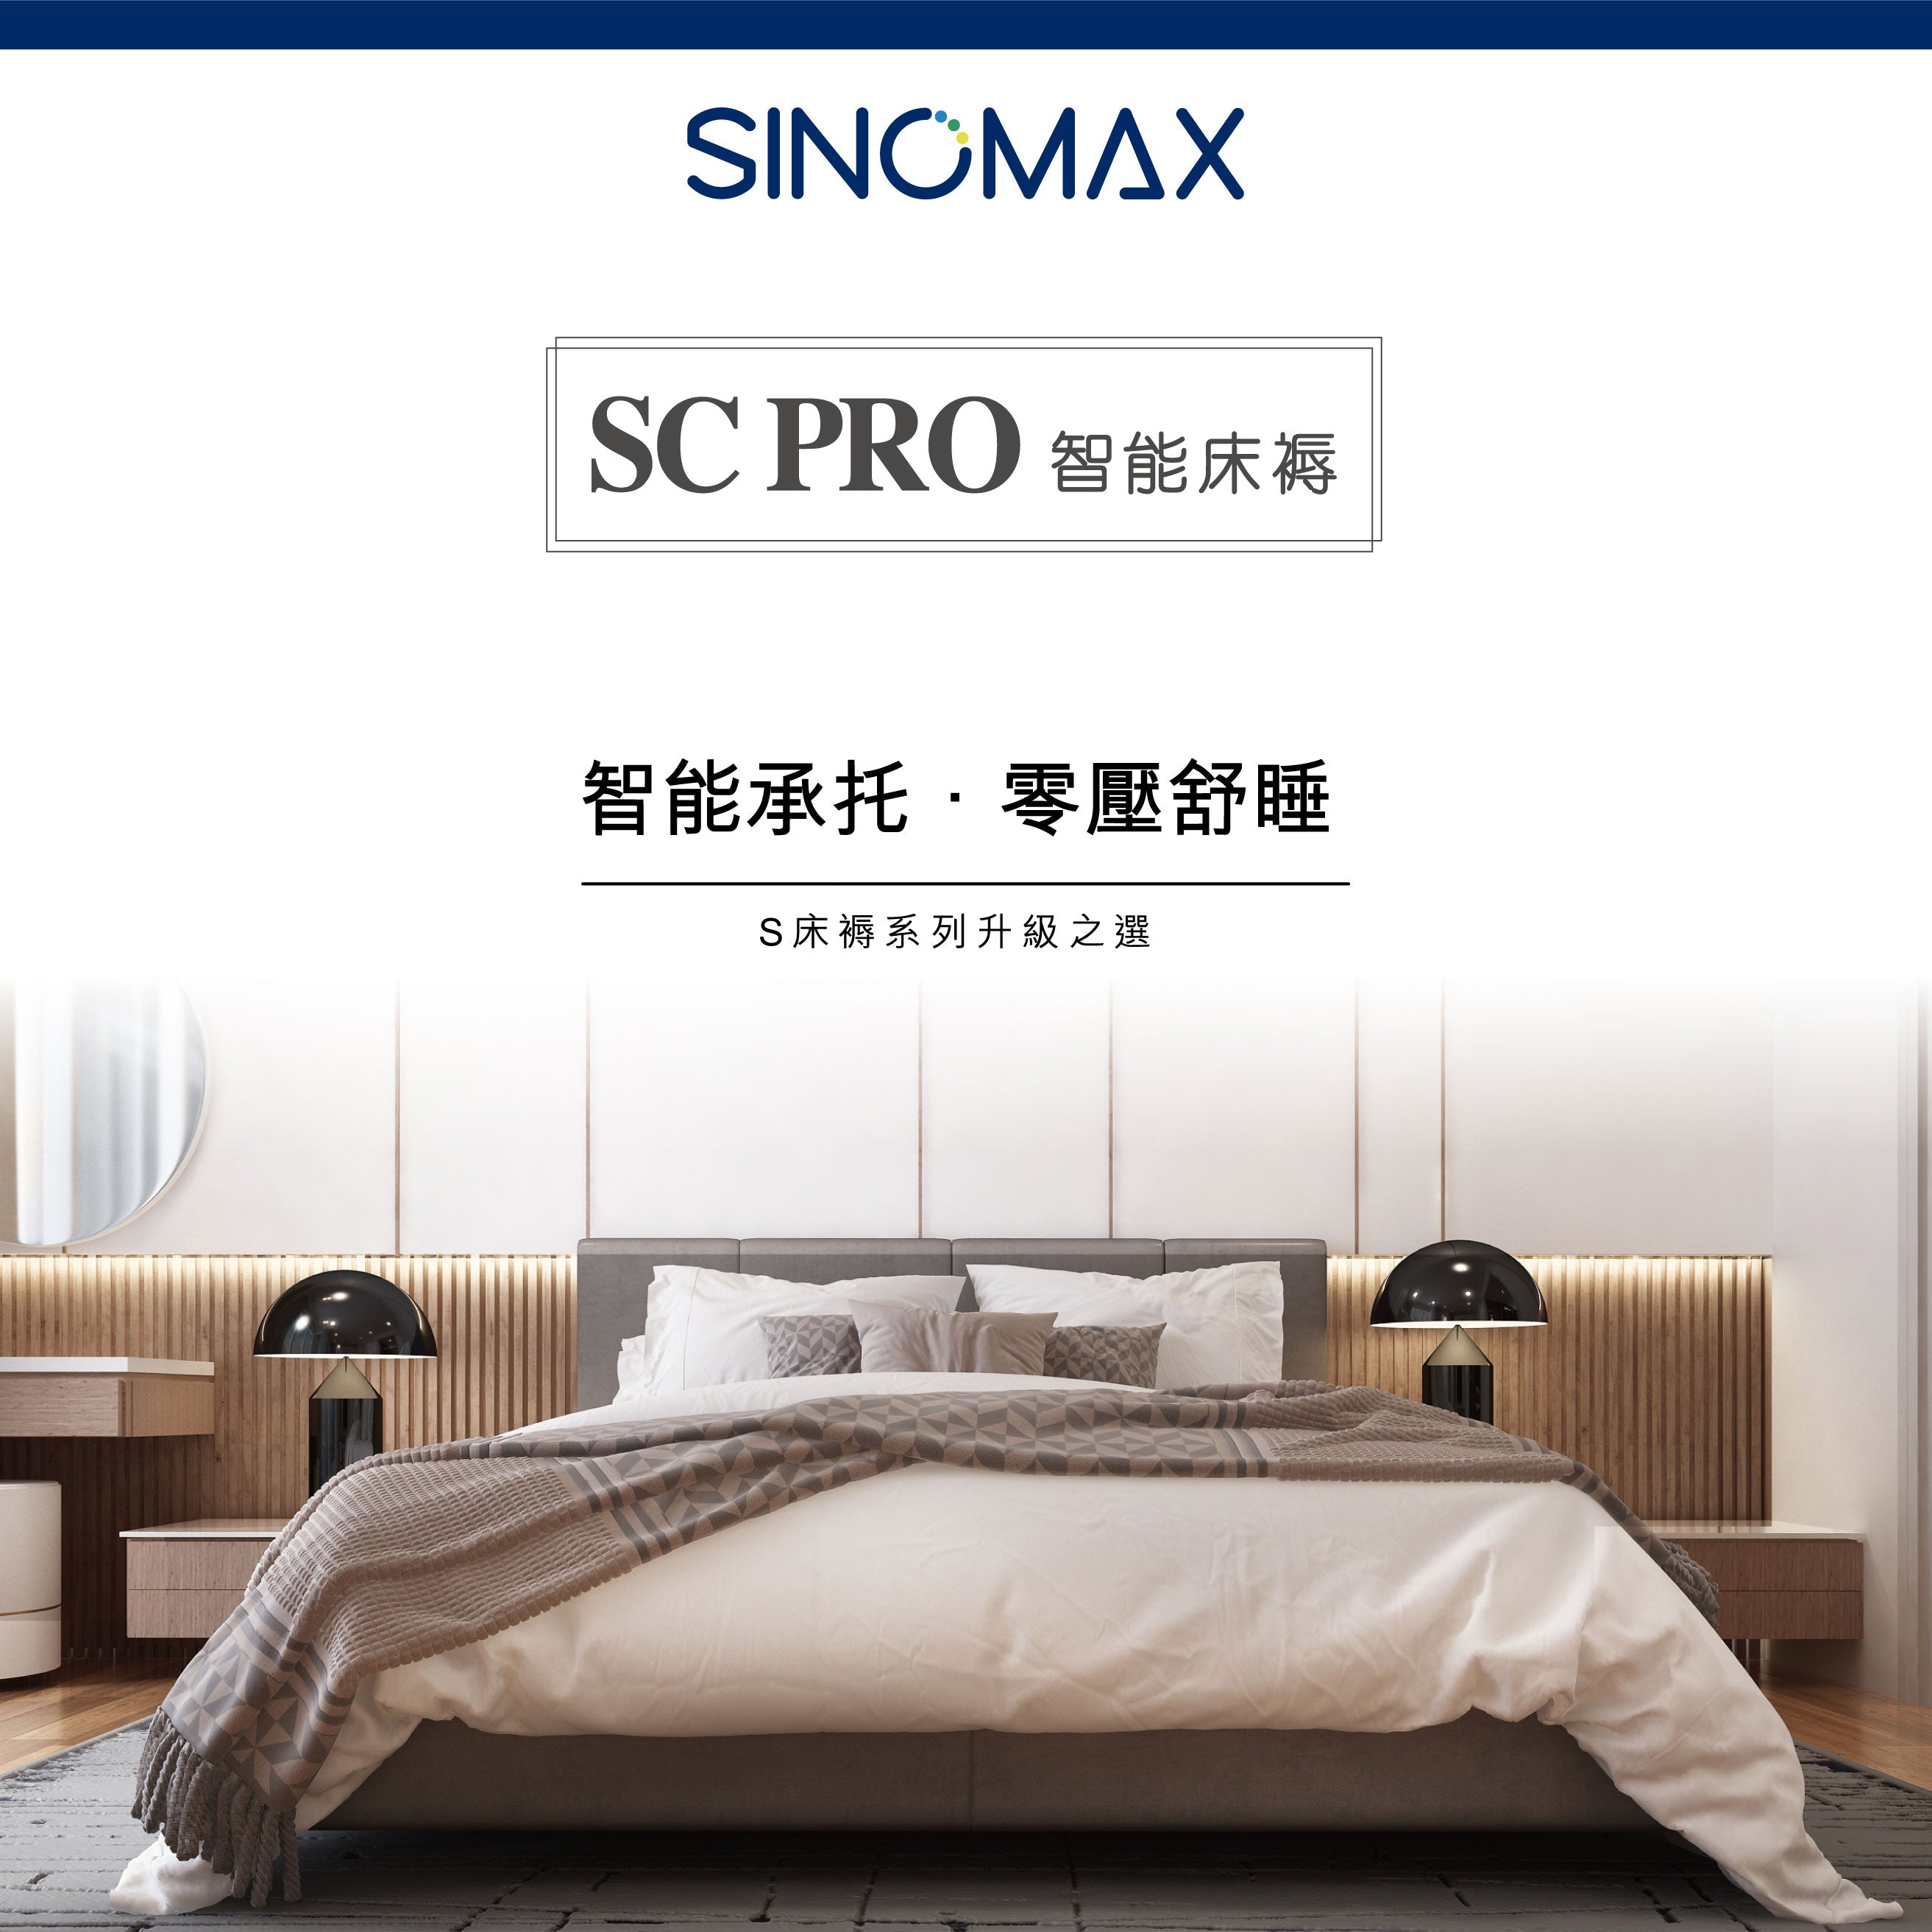 SC Pro Mattress- Tailor-made size (48" W or below)